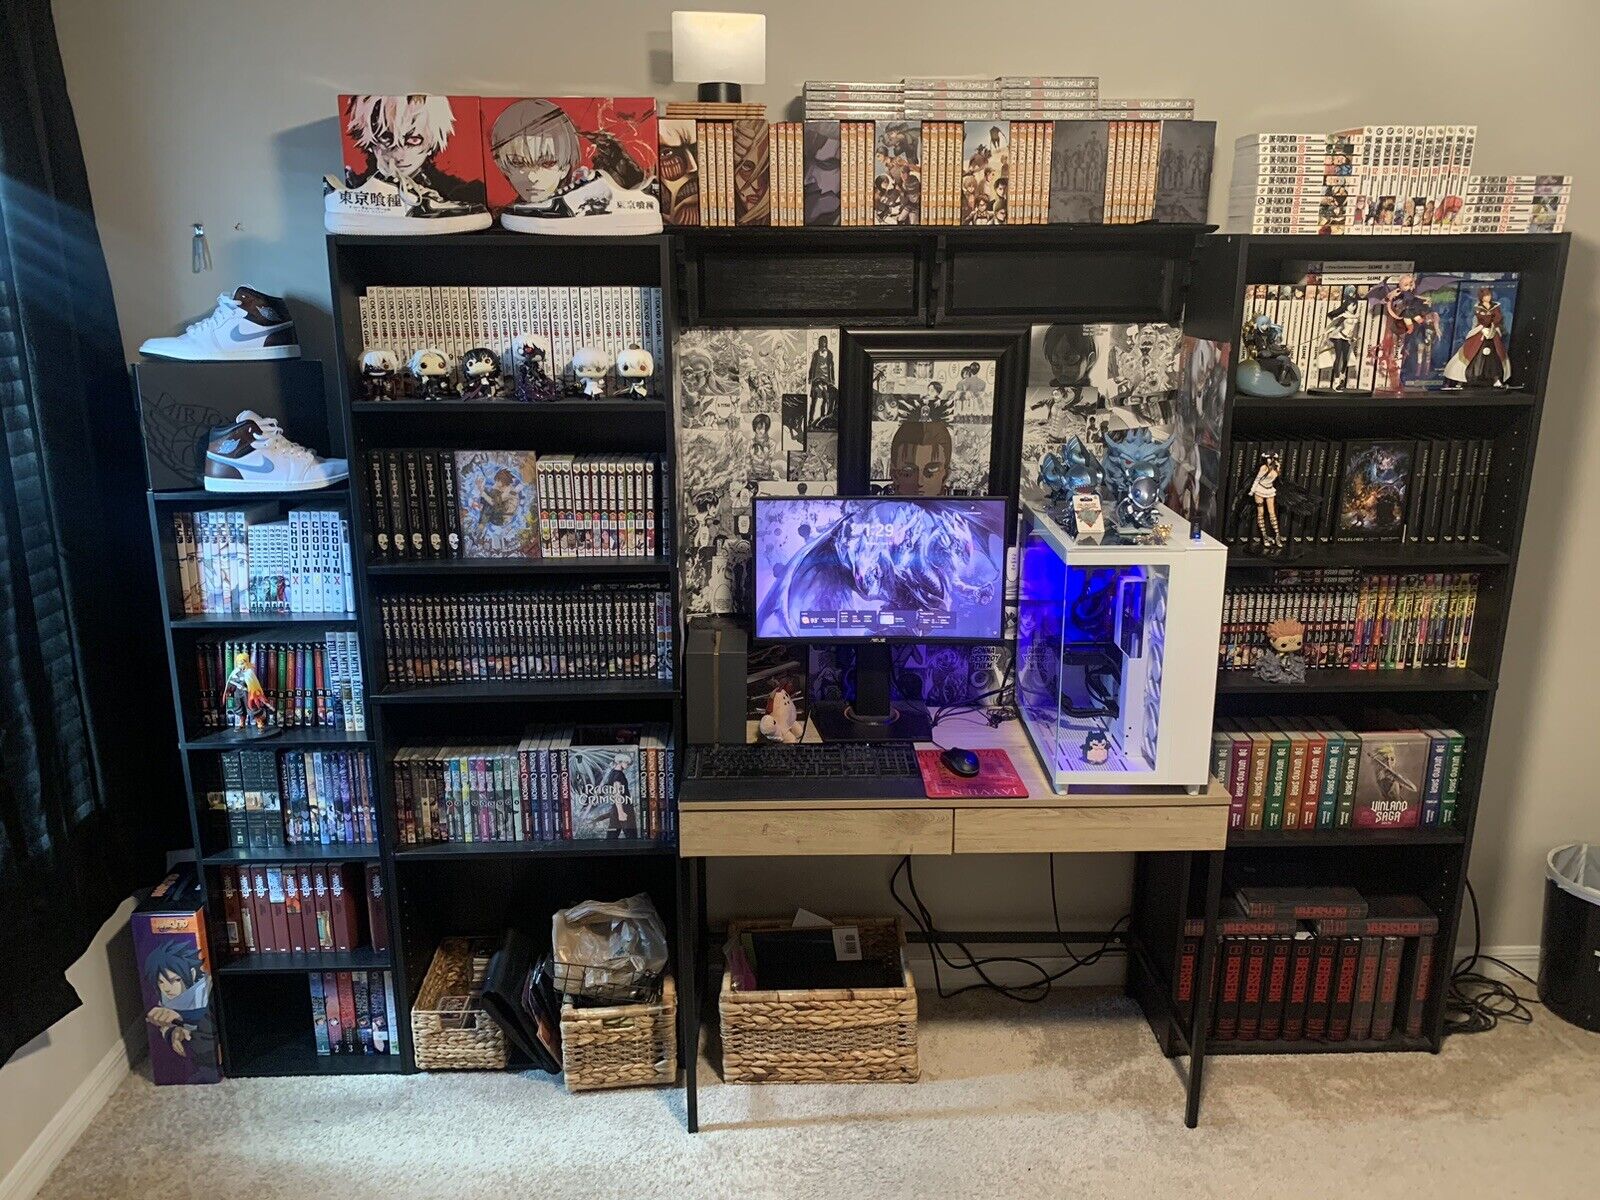 Manga Lot - I Have individual postings Up Take a look and lmk if ur interested 